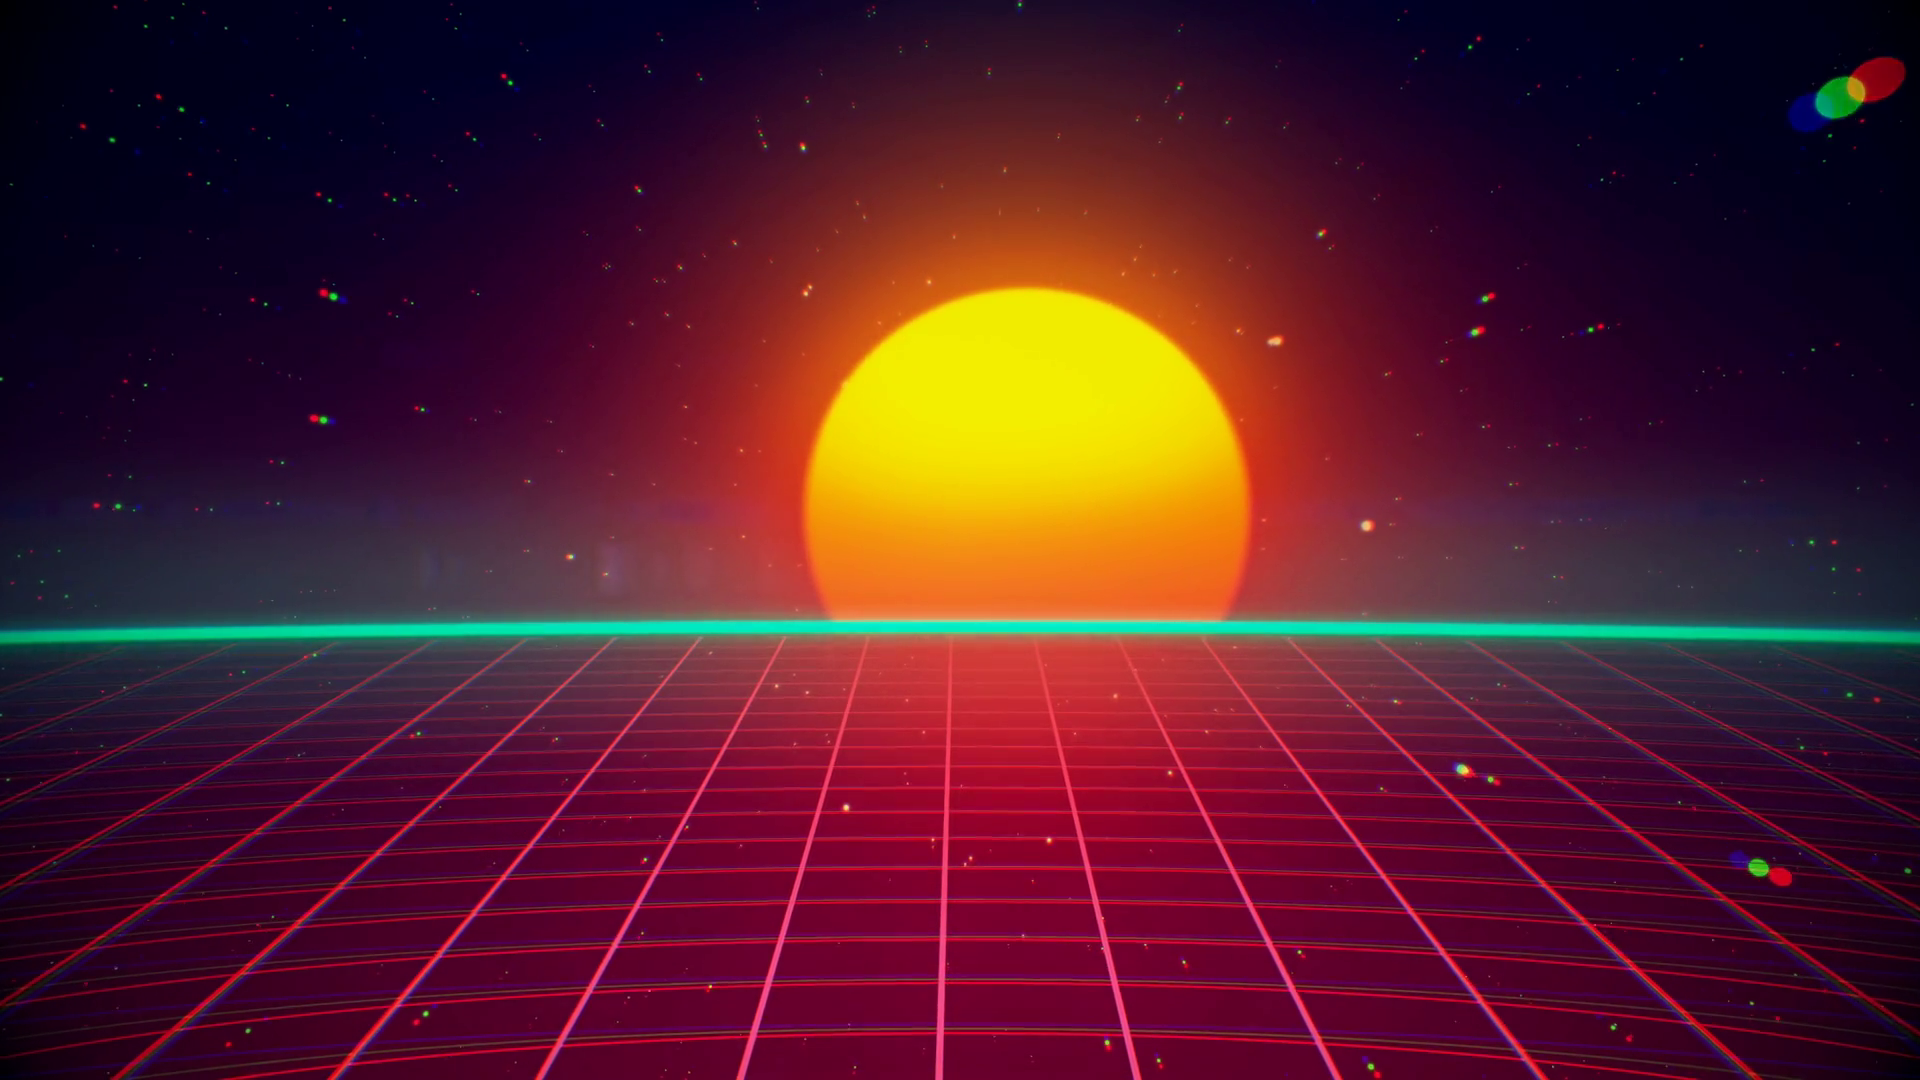 Retro Futuristic 80s VHS Tape Video Game Intro Landscape. Flight Over The Neon Red Laser Beam Glowing Grid With Sunrise And Stars. Arcade Vintage Stylized Sci Fi VJ Motion 3D Animation In 4K